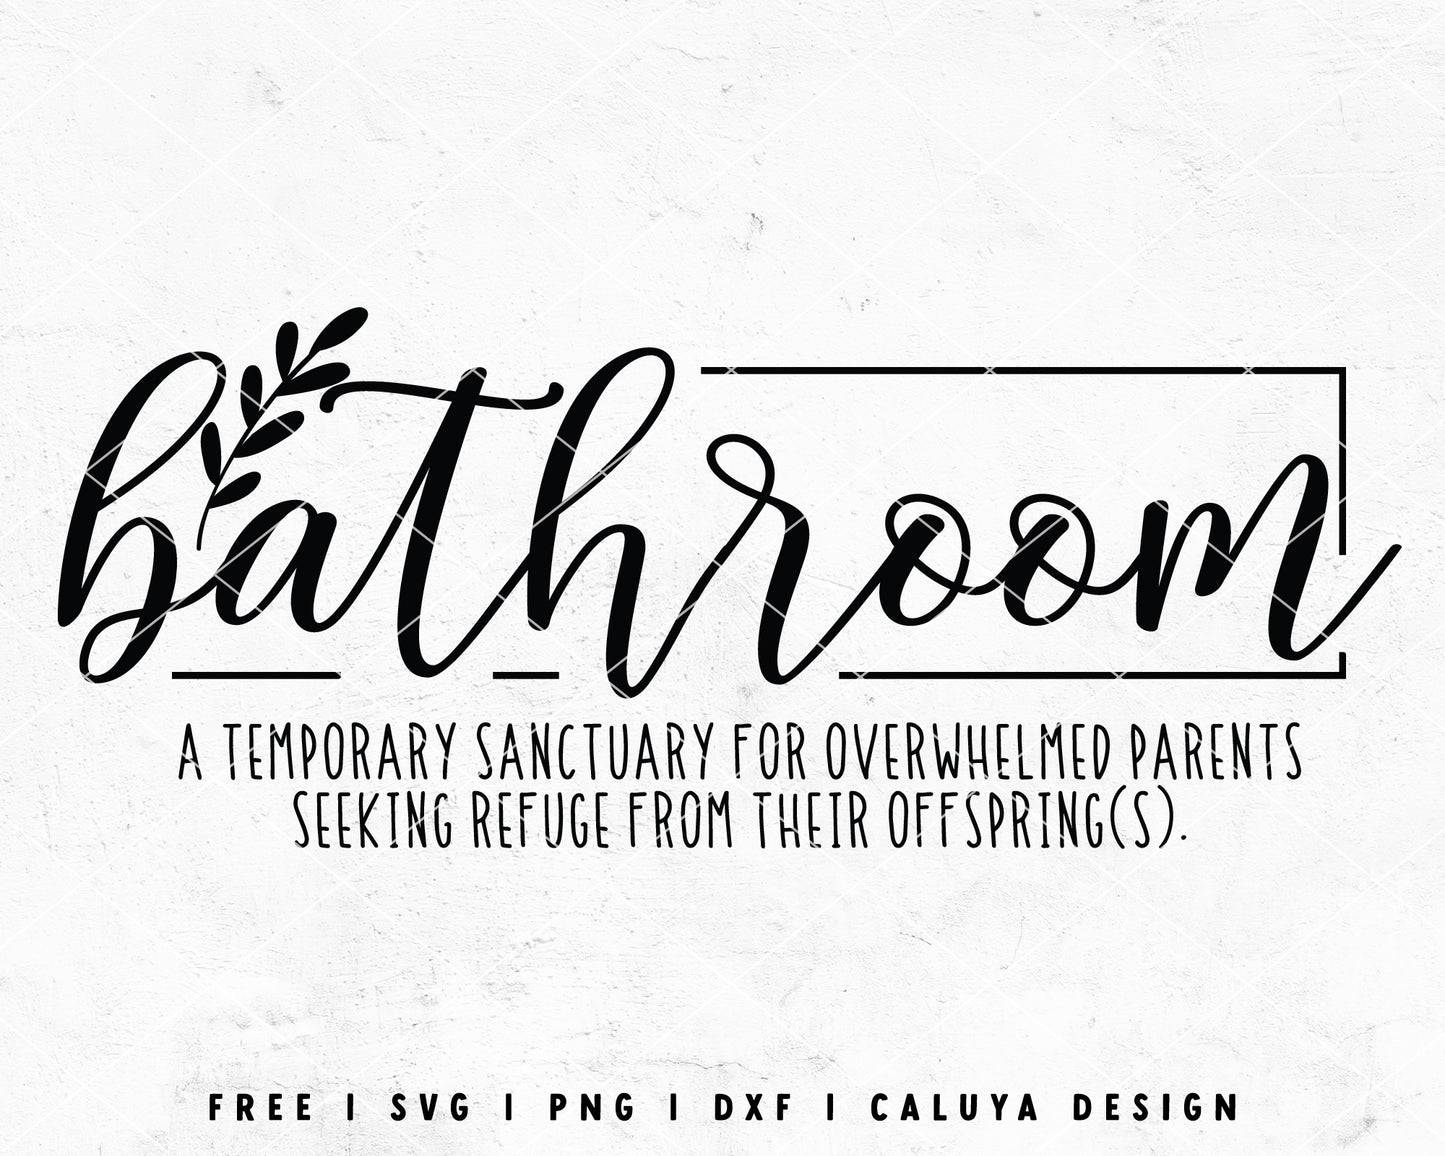 FREE Bathroom SVG | Sign Making SVG  Cut File for Cricut, Cameo Silhouette | Free SVG Cut File